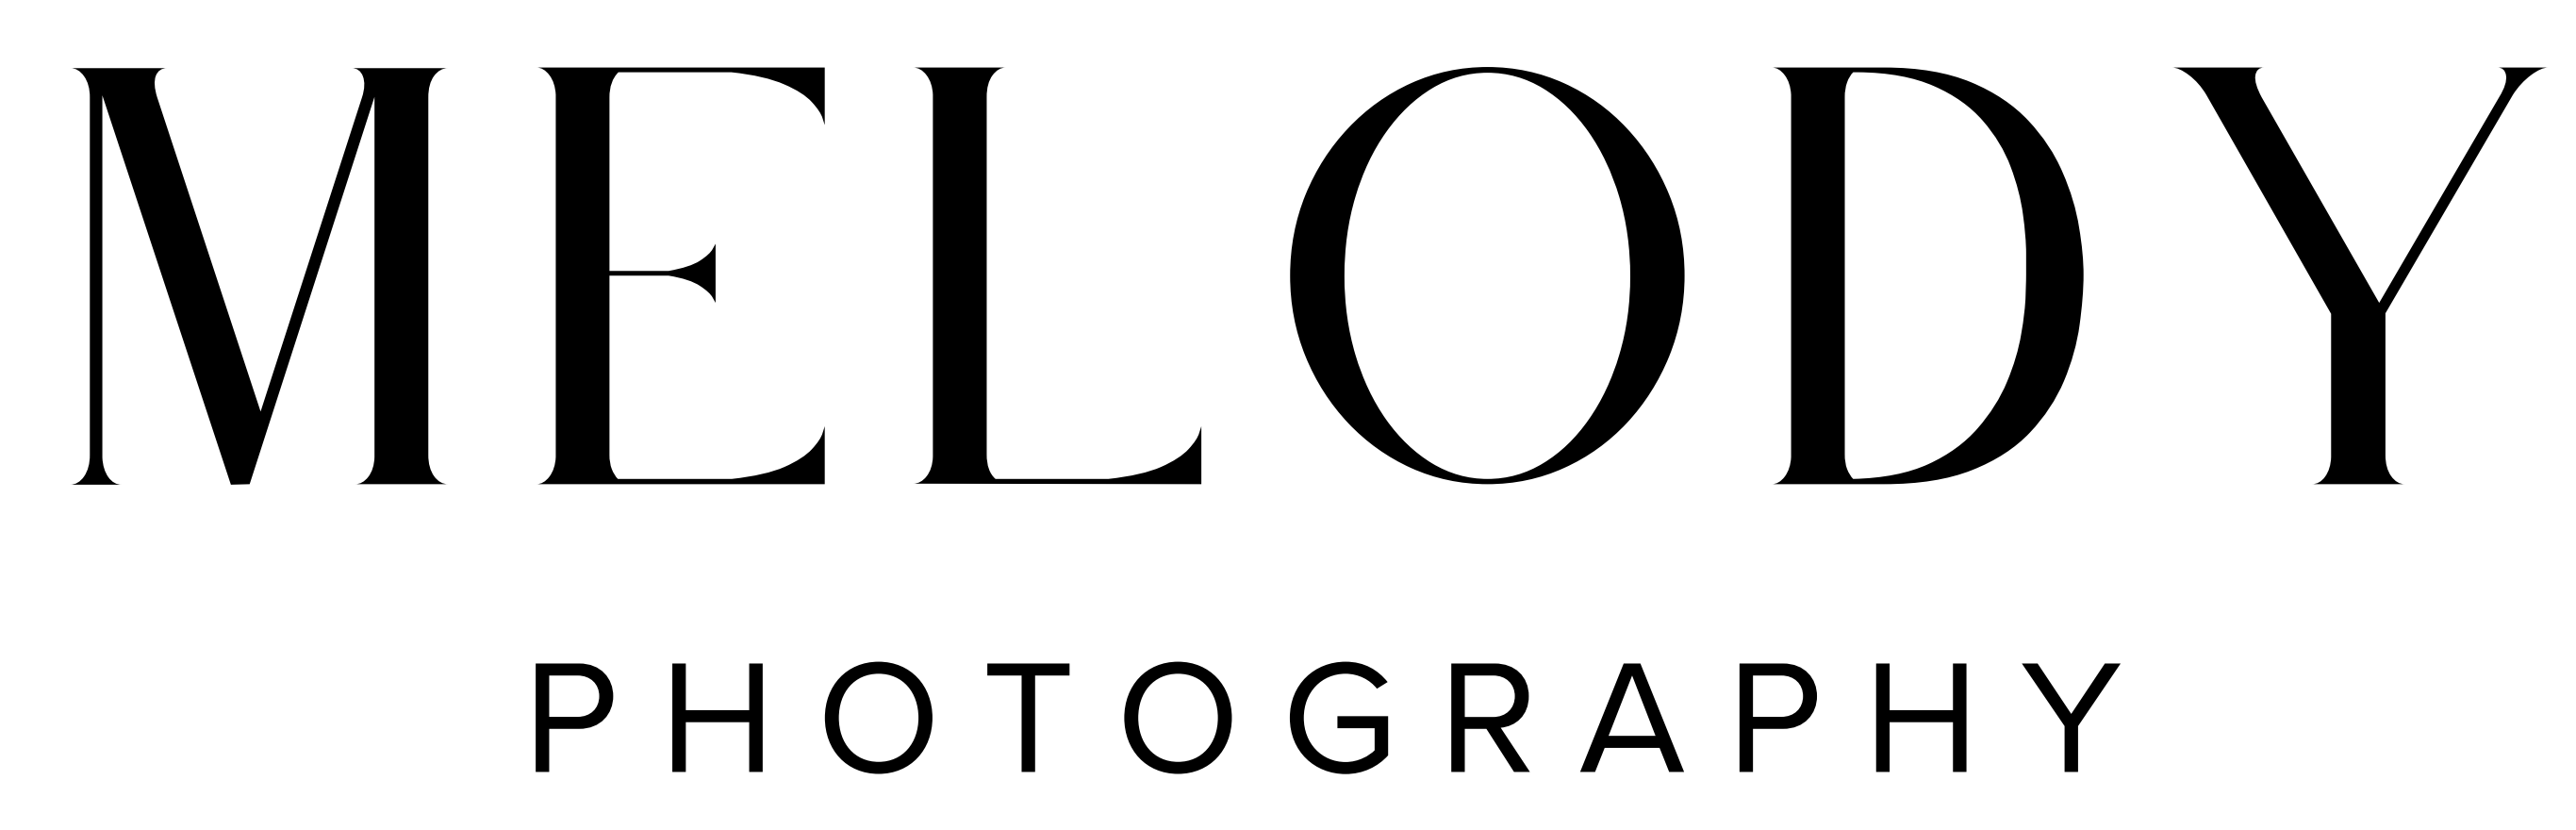 Melody Photography Site Logo Image